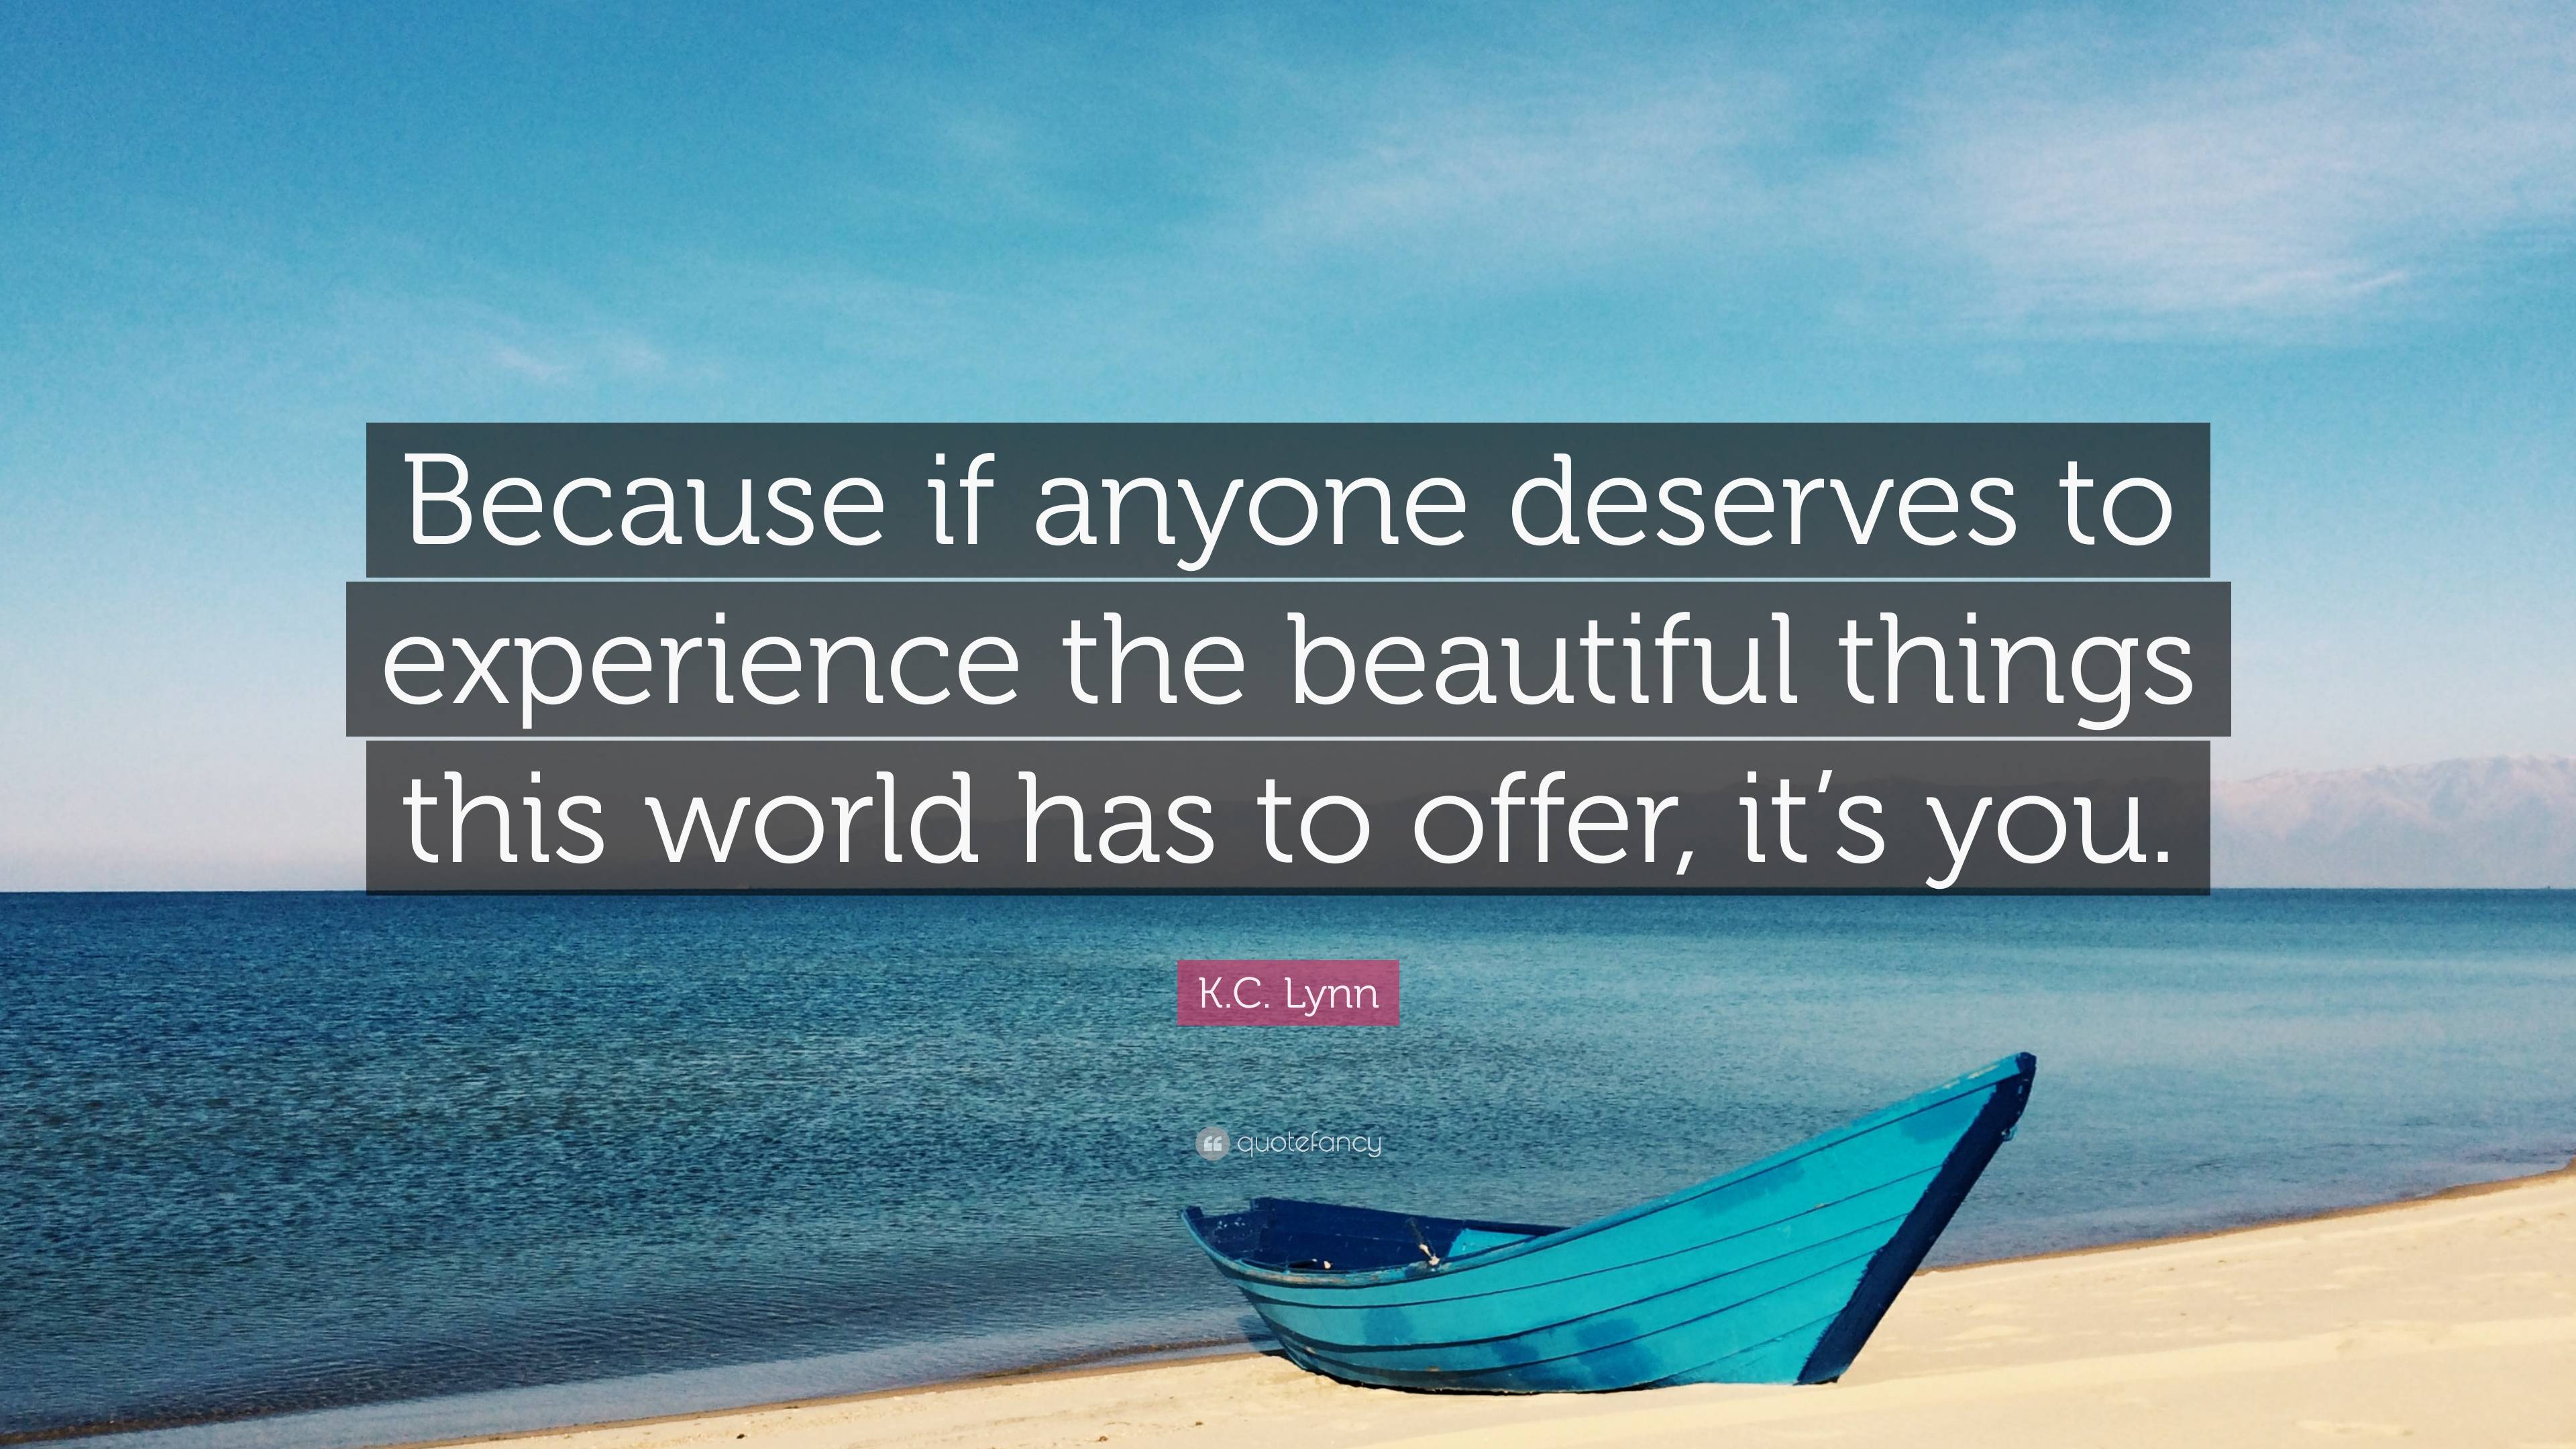 Everyone deserves a perfect world!